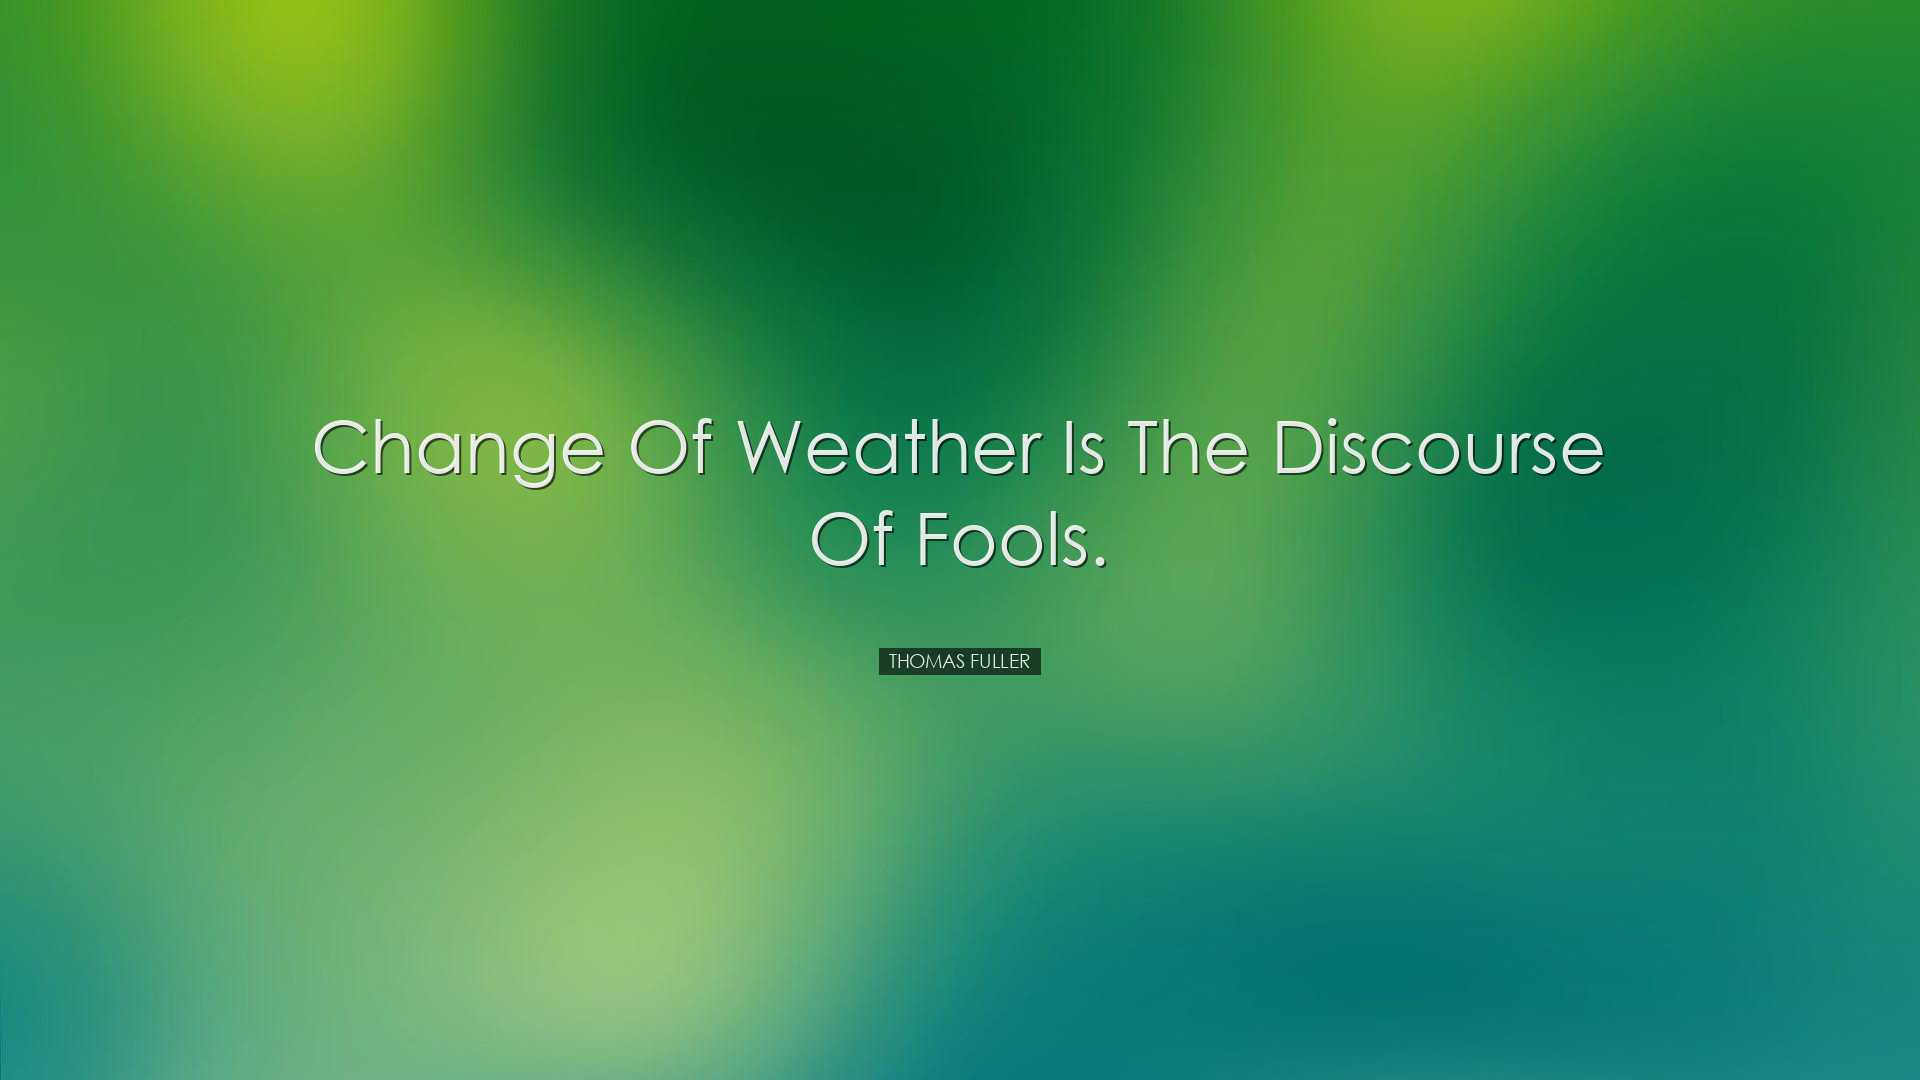 Change of weather is the discourse of fools. - Thomas Fuller